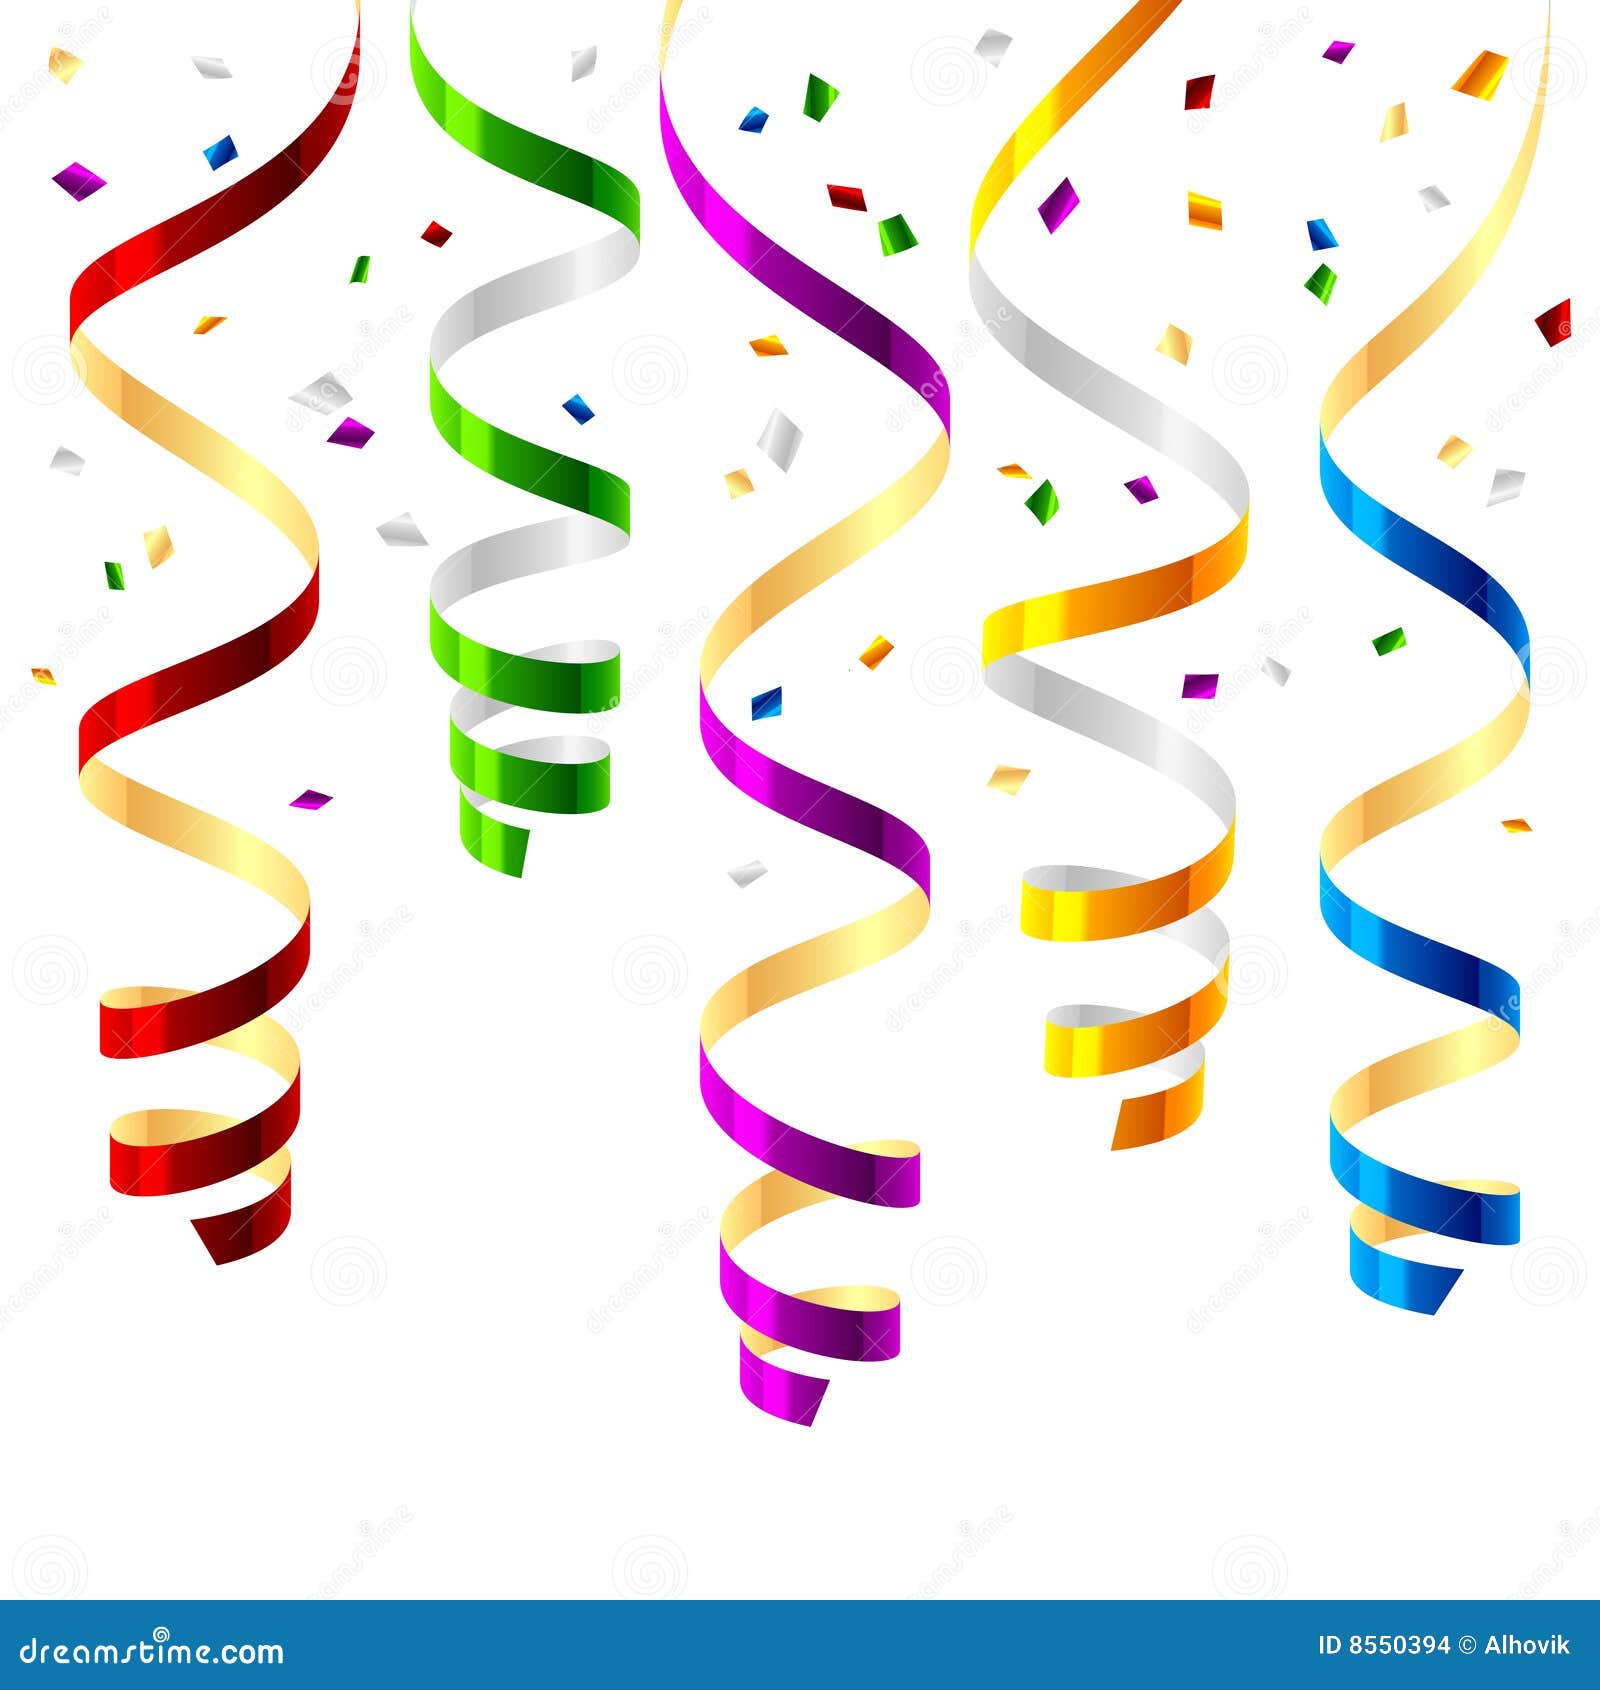 clip art free balloons and streamers - photo #30